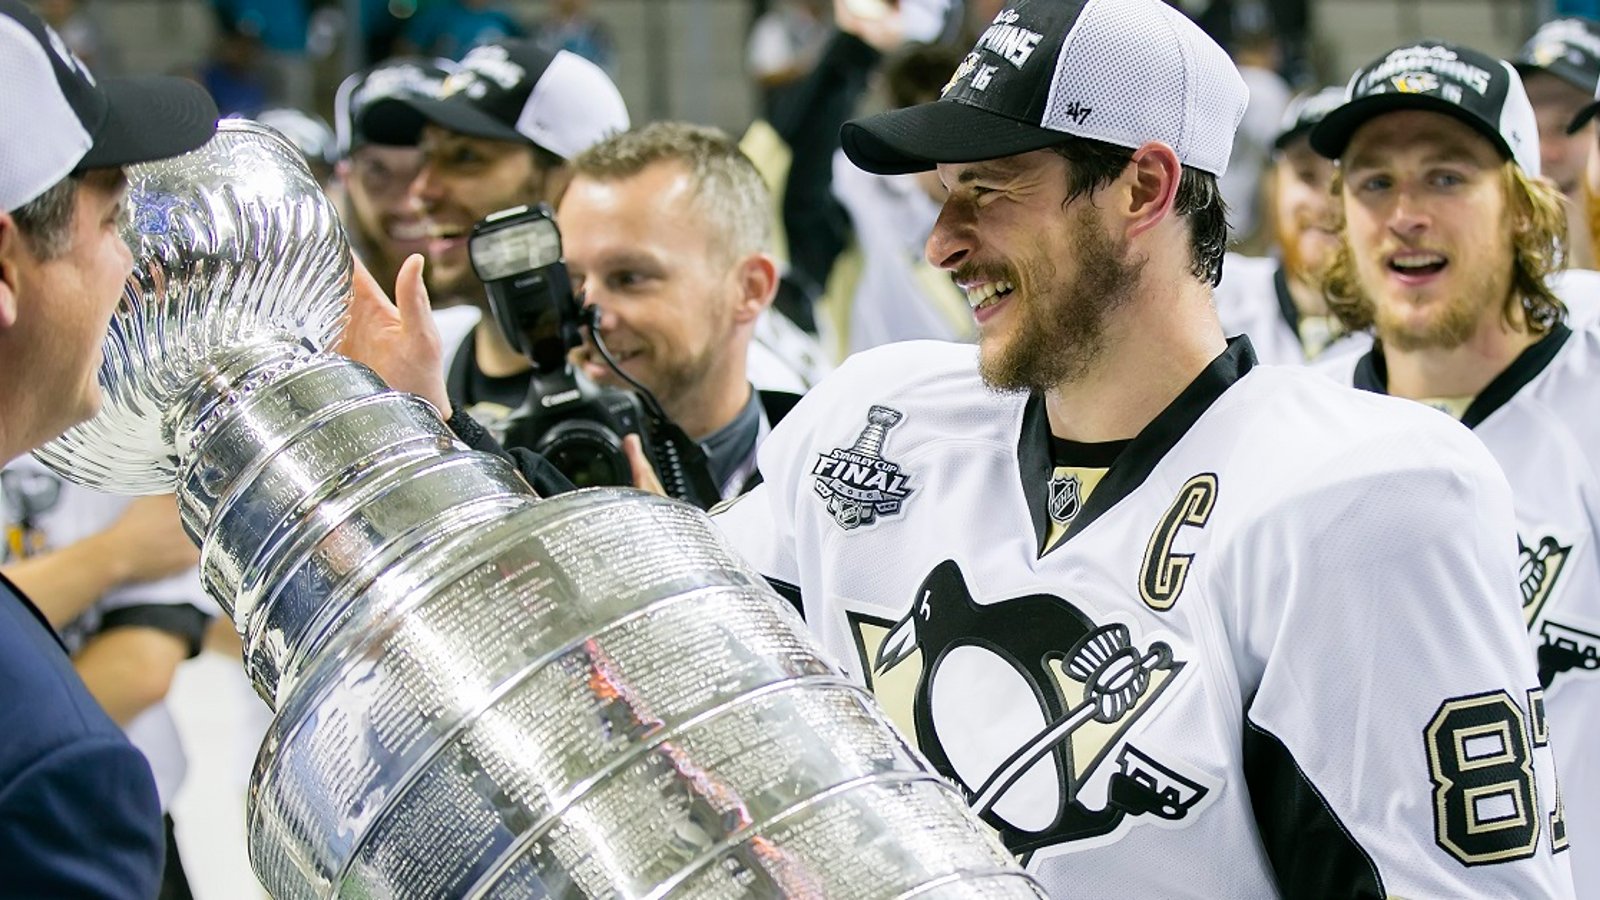 Breaking: There is now a new favorite to win the Stanley Cup.